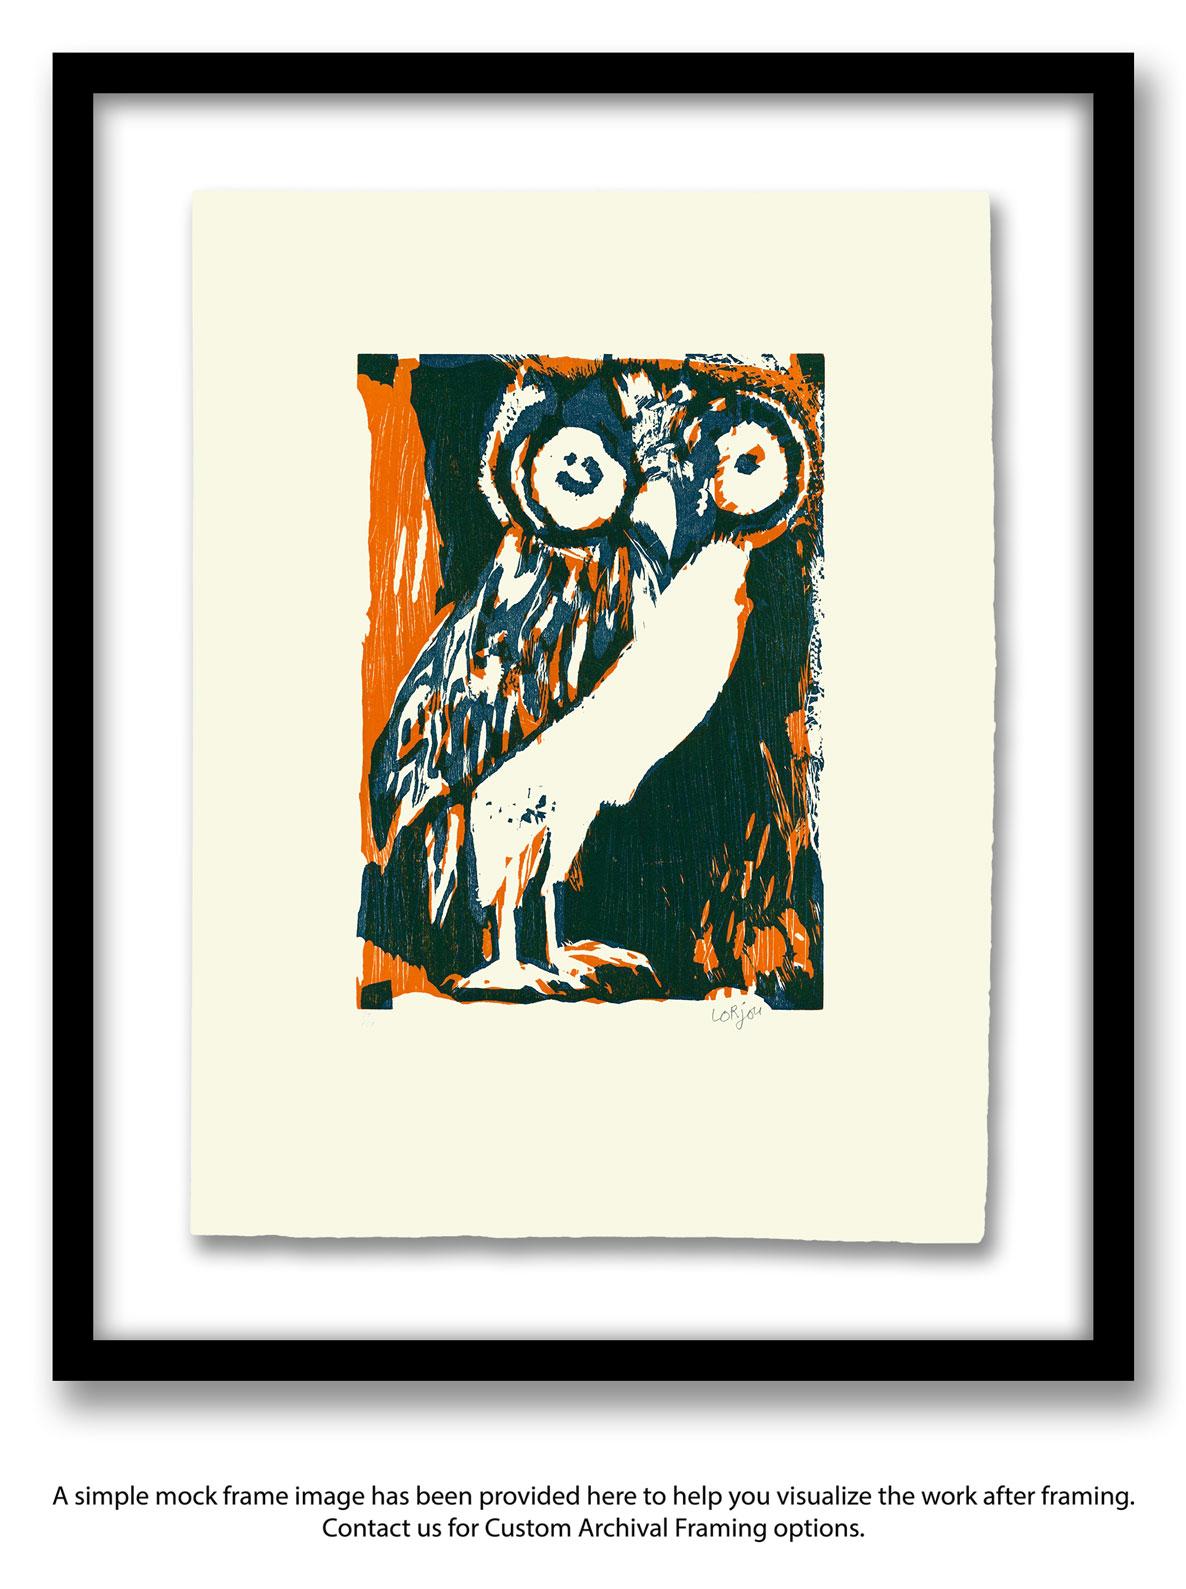 “Le Hibou” (The Owl), a Limited Edition and Hand-Signed Woodblock by Bernard Lorjou, is a piece for the true collector. This whimsical, abstract, realist, expressionist portrait of an owl is perfect for those who have an affinity for abstracts,